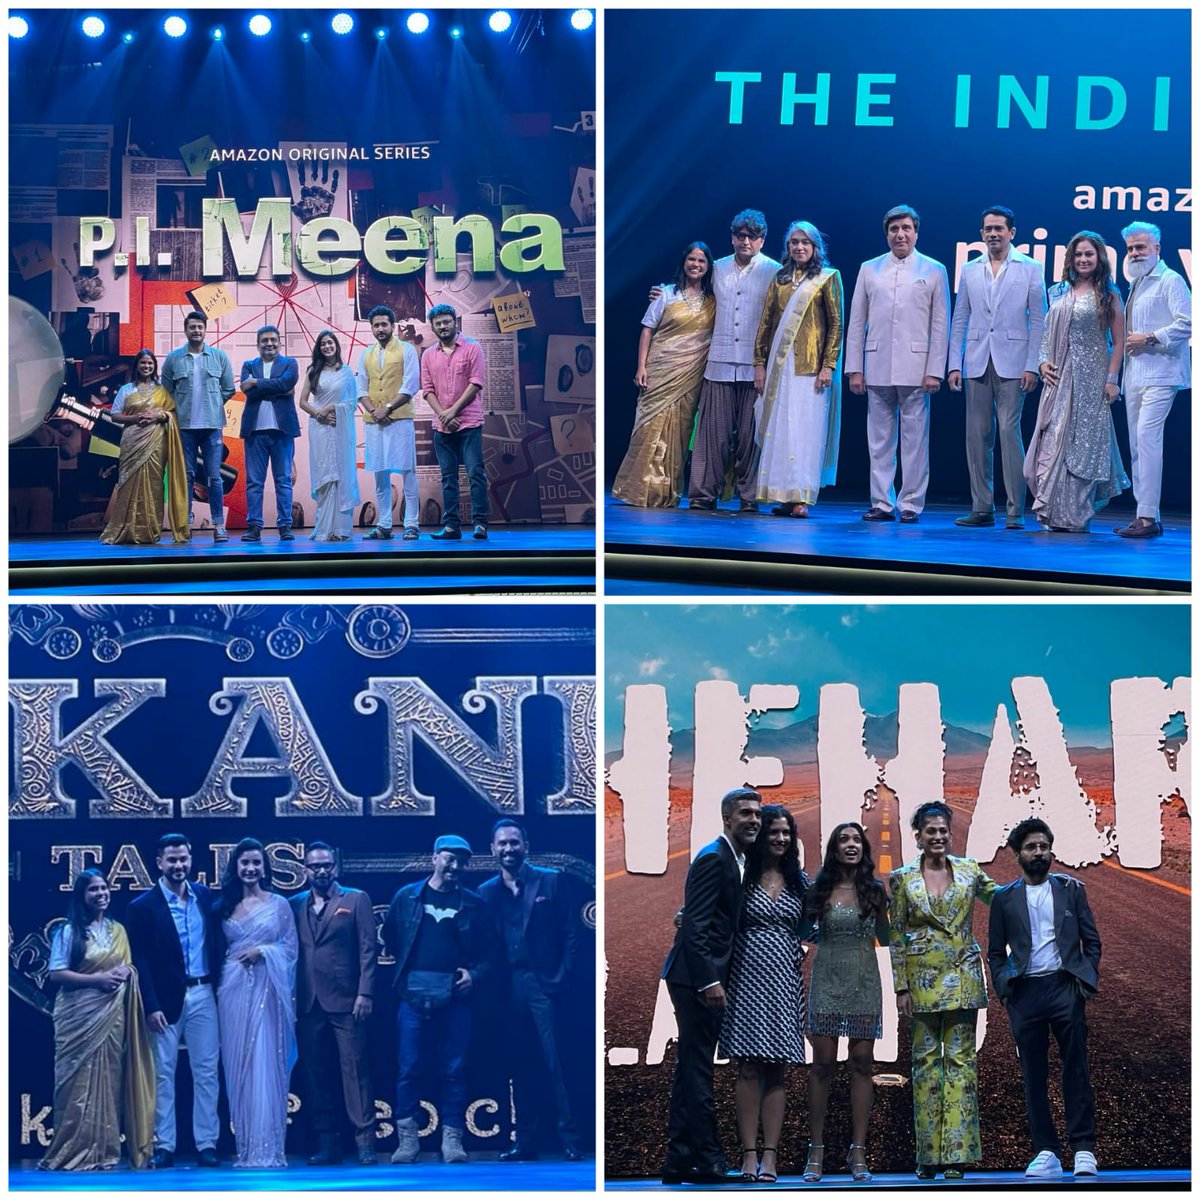 .@PrimeVideoIN presents a bucket full of four new shows from the house of @d2r_films, @offroadfilms, and #HatsOffProduction.

#PrimeVideoPresentsIndia #Gulkanda #PIMeena #SheharLakhot #HappyFamilyConditionsApply #SeeWhereItTakesYou